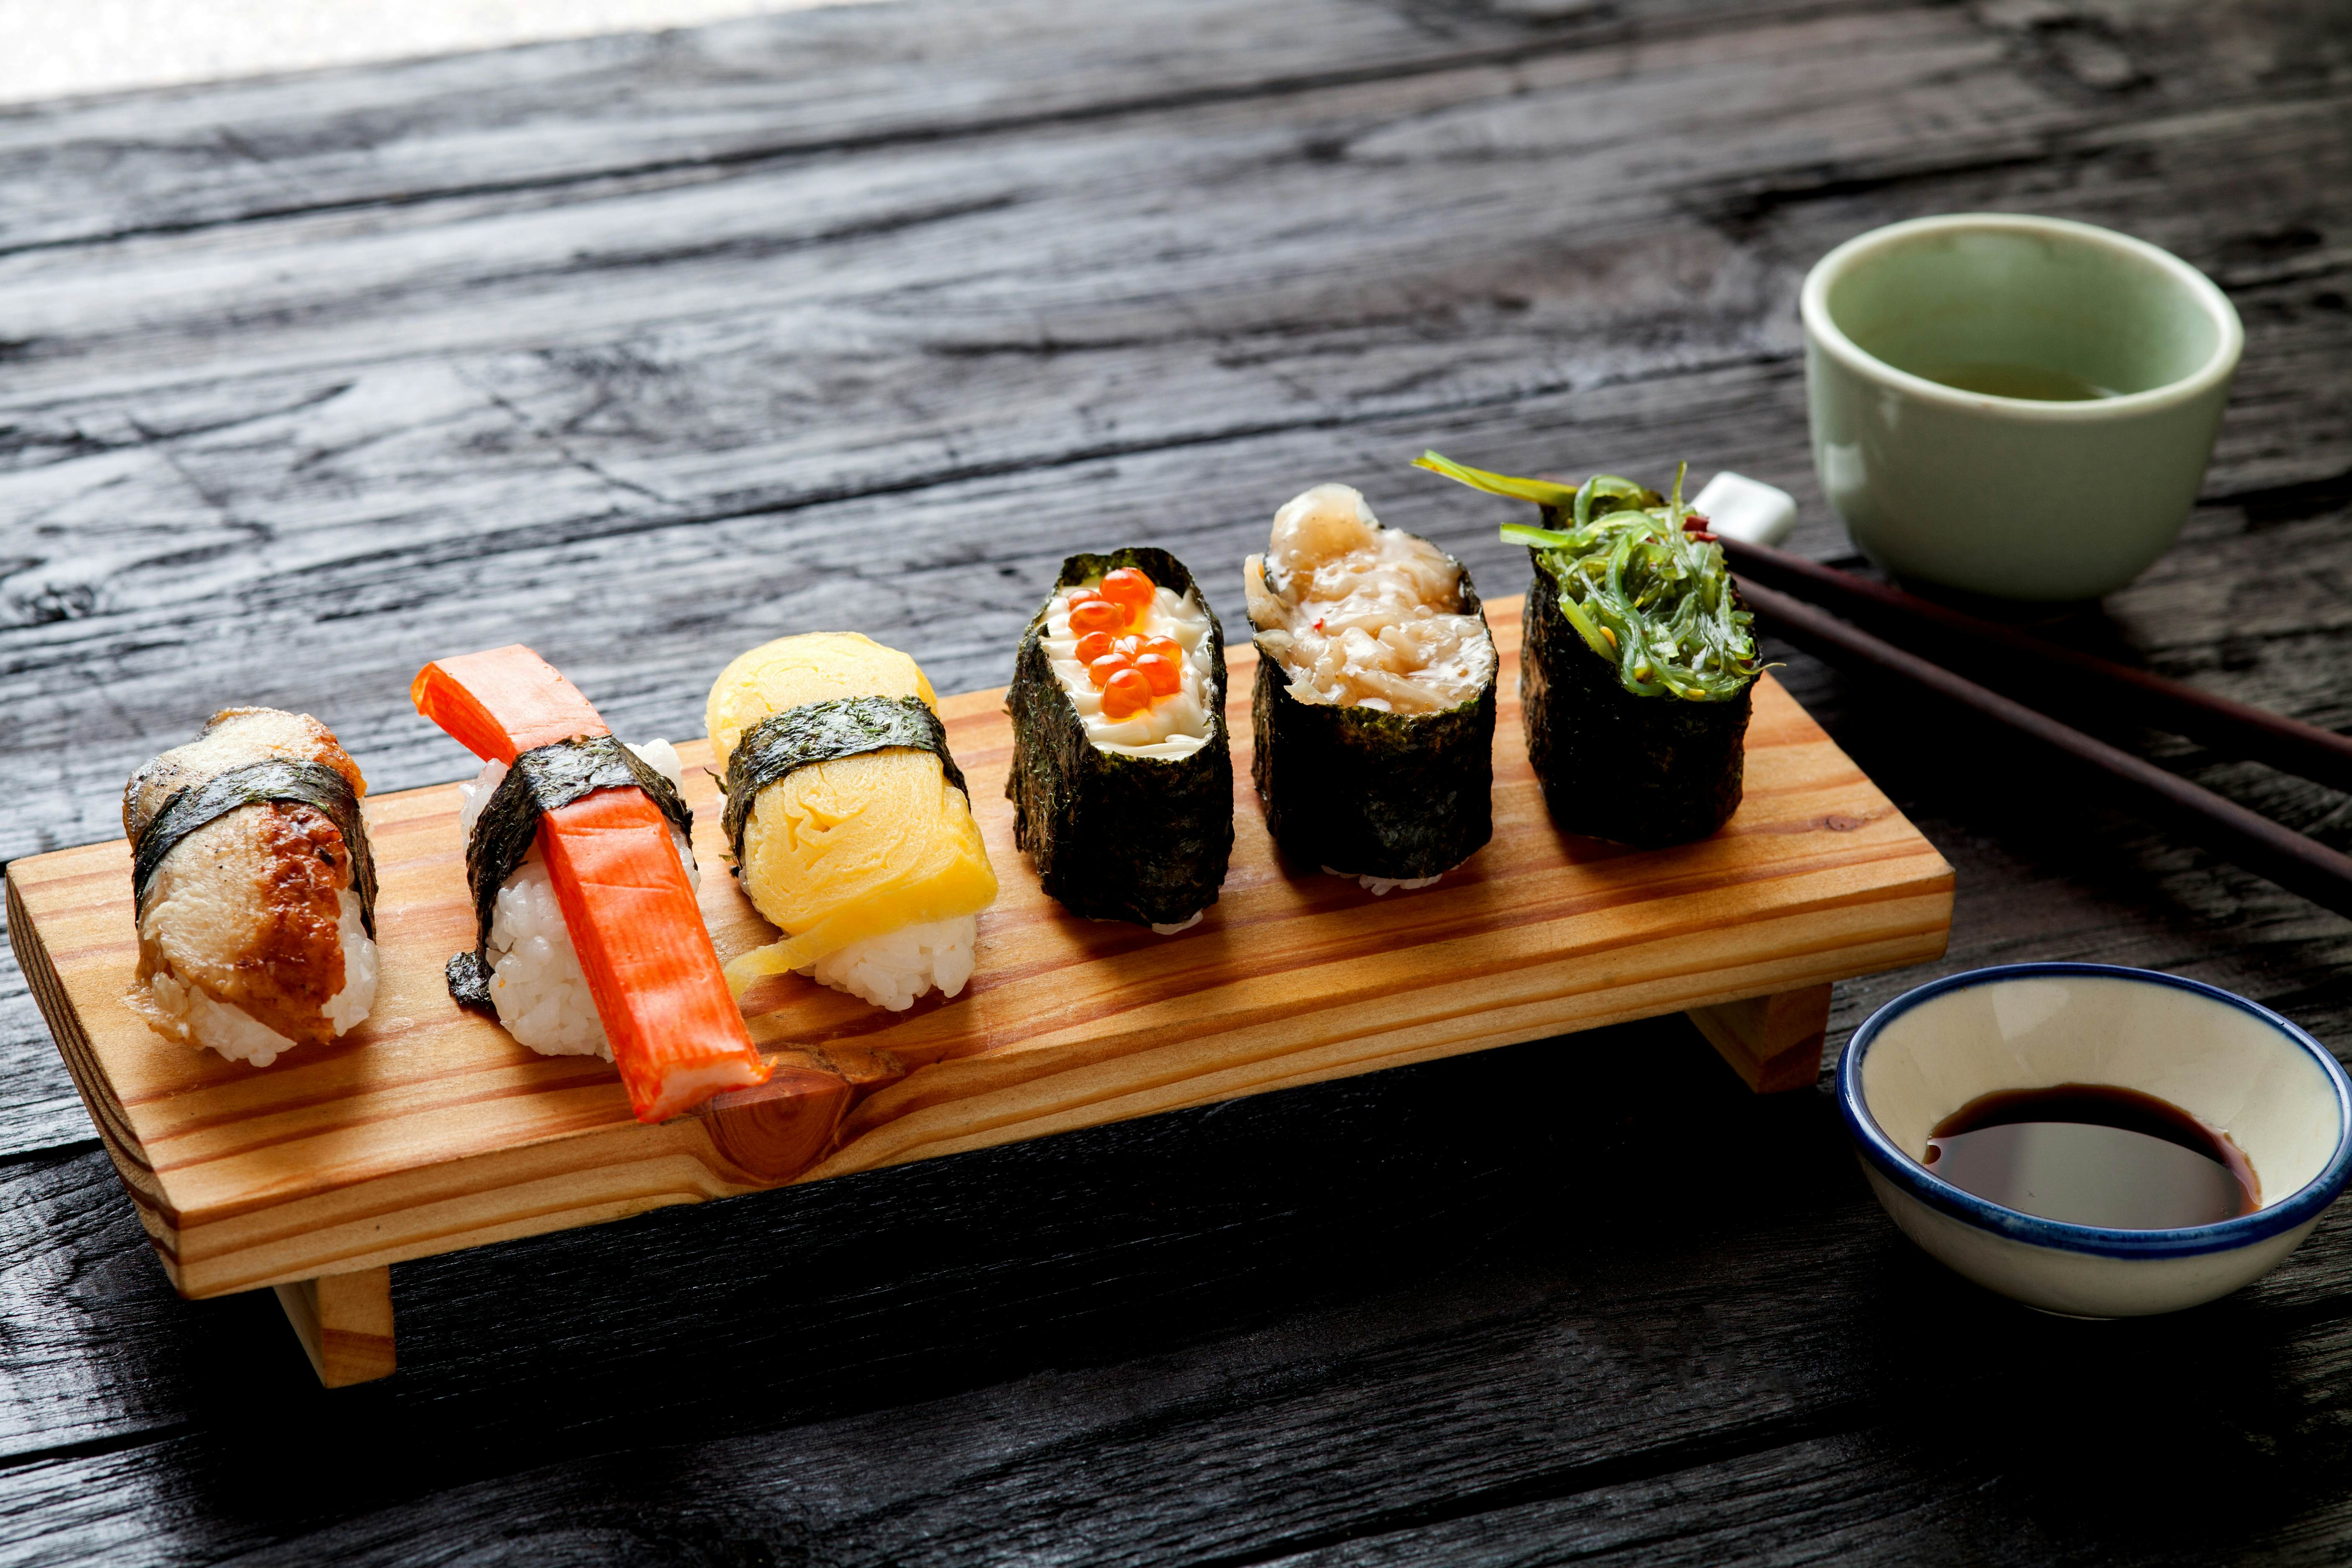 What you need to know about Japanese food culture - Lonely Planet